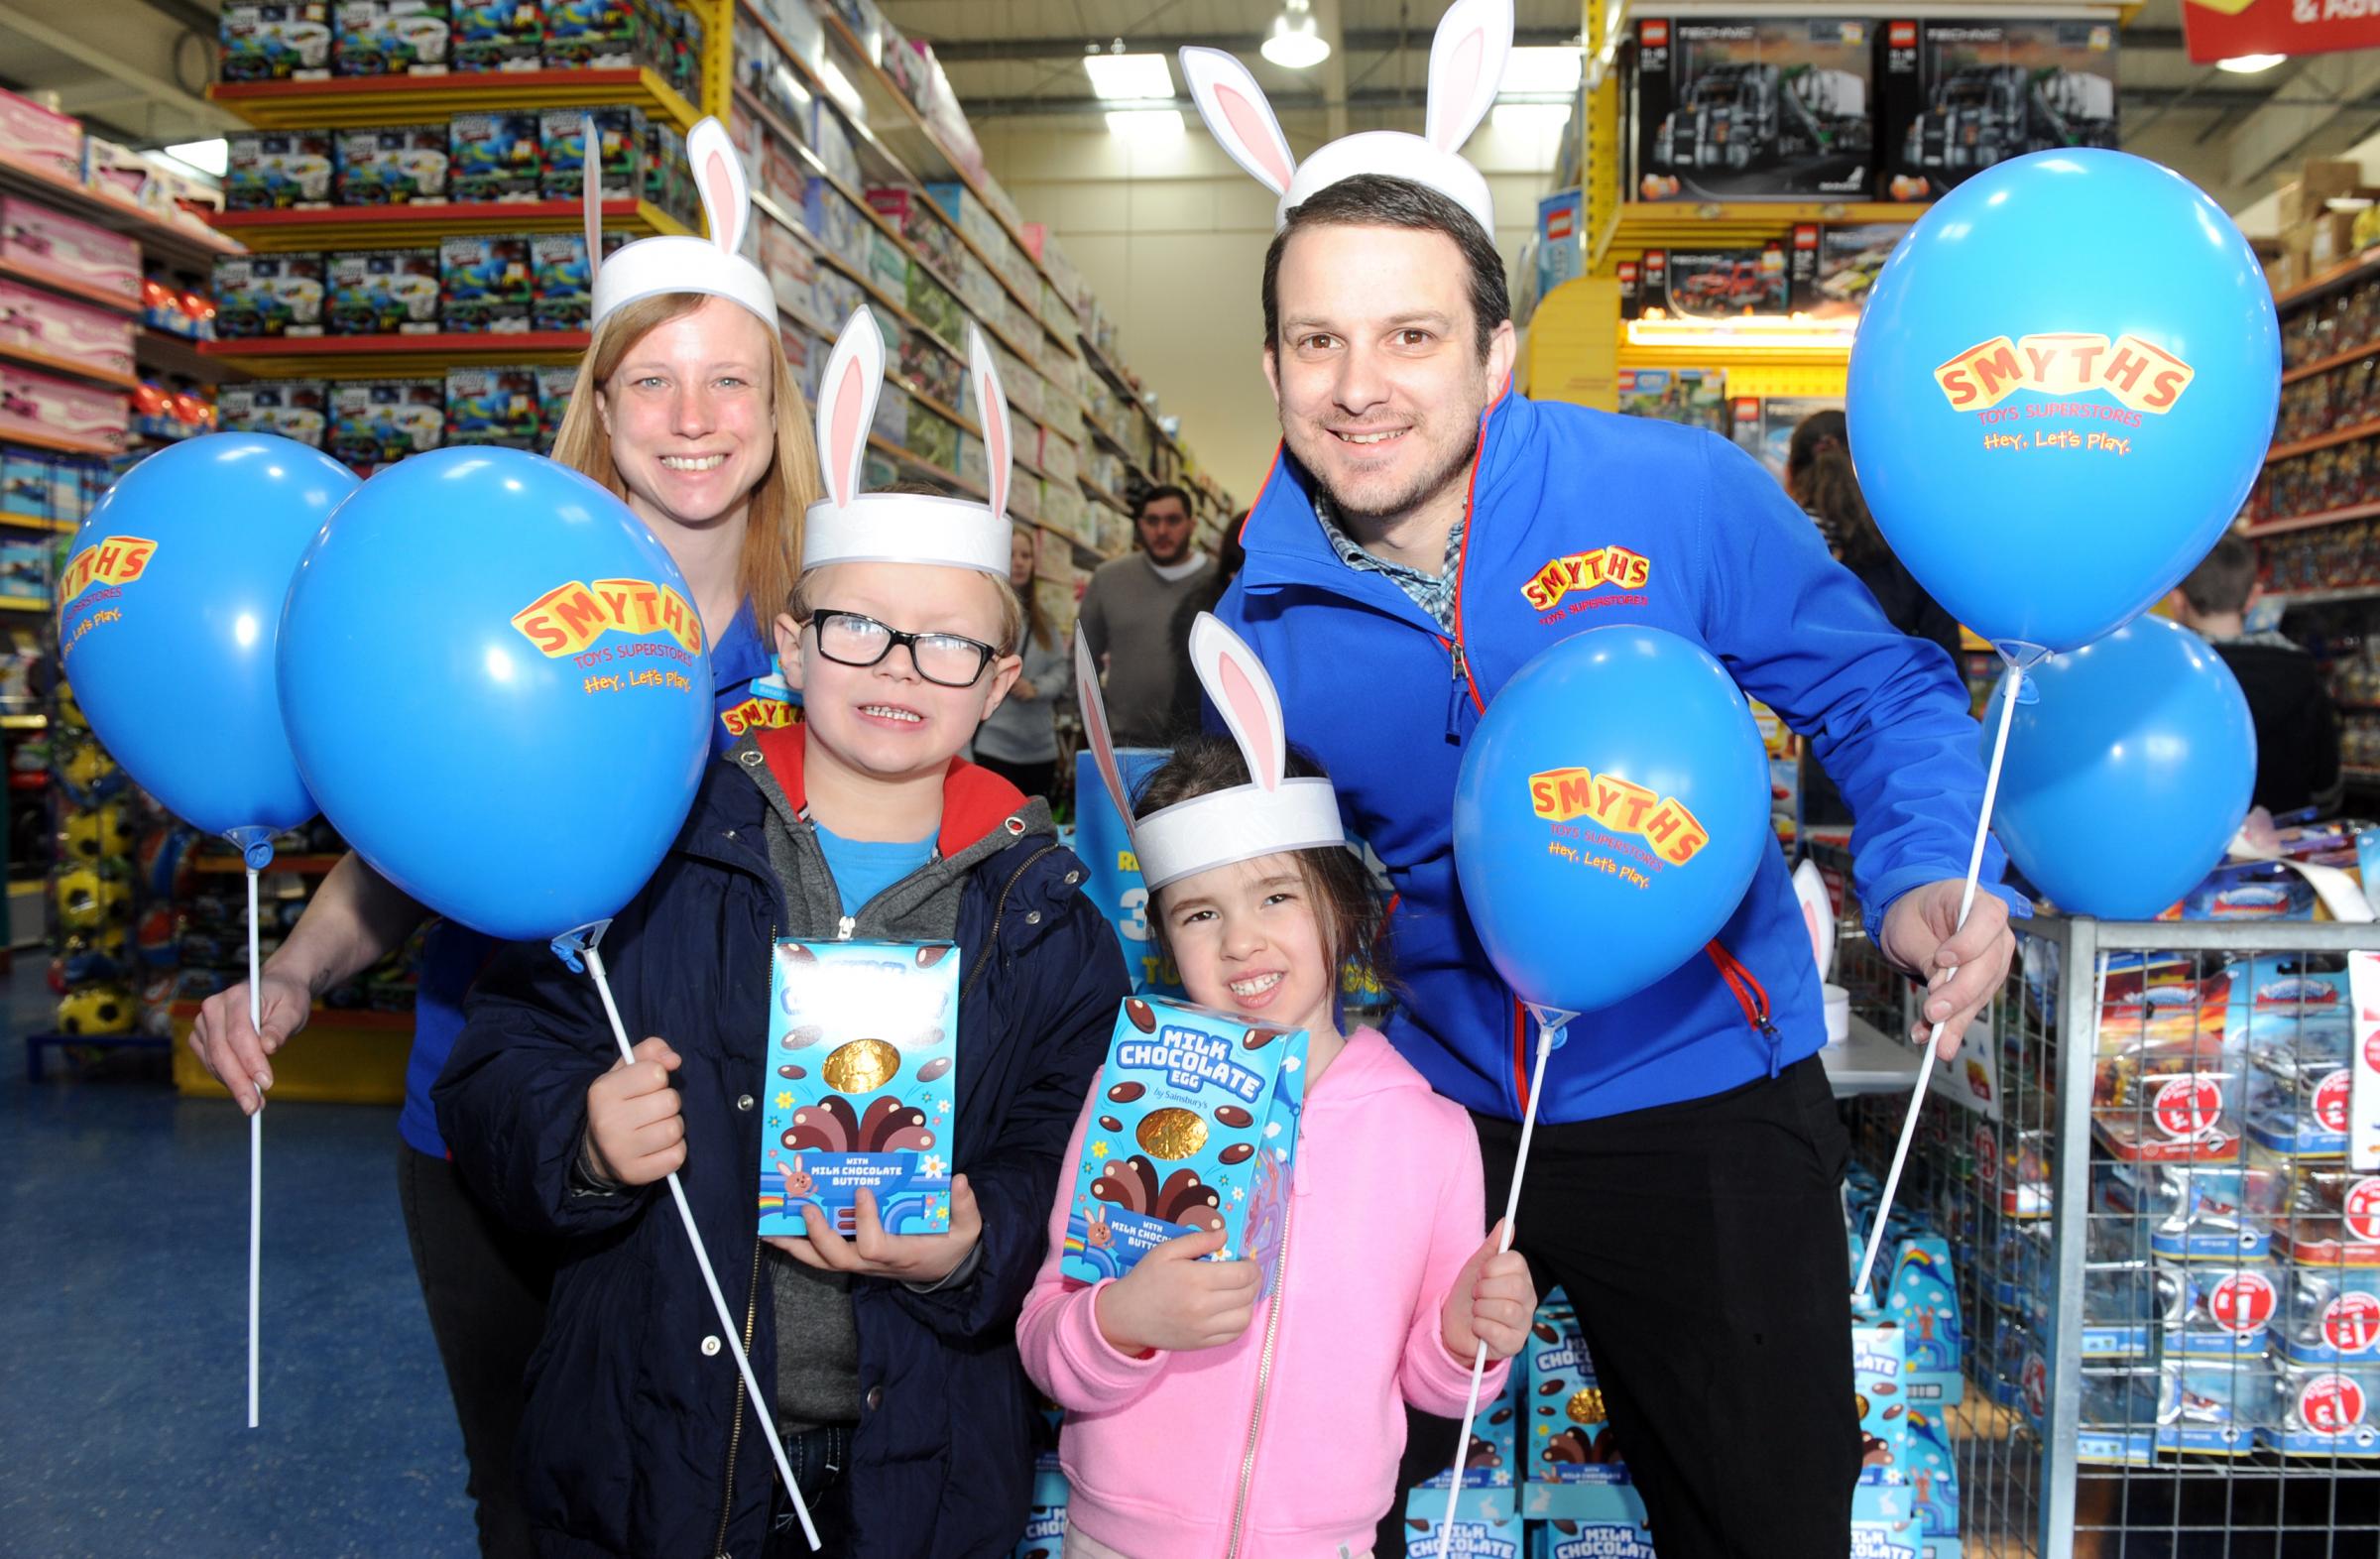 smyths easter opening times